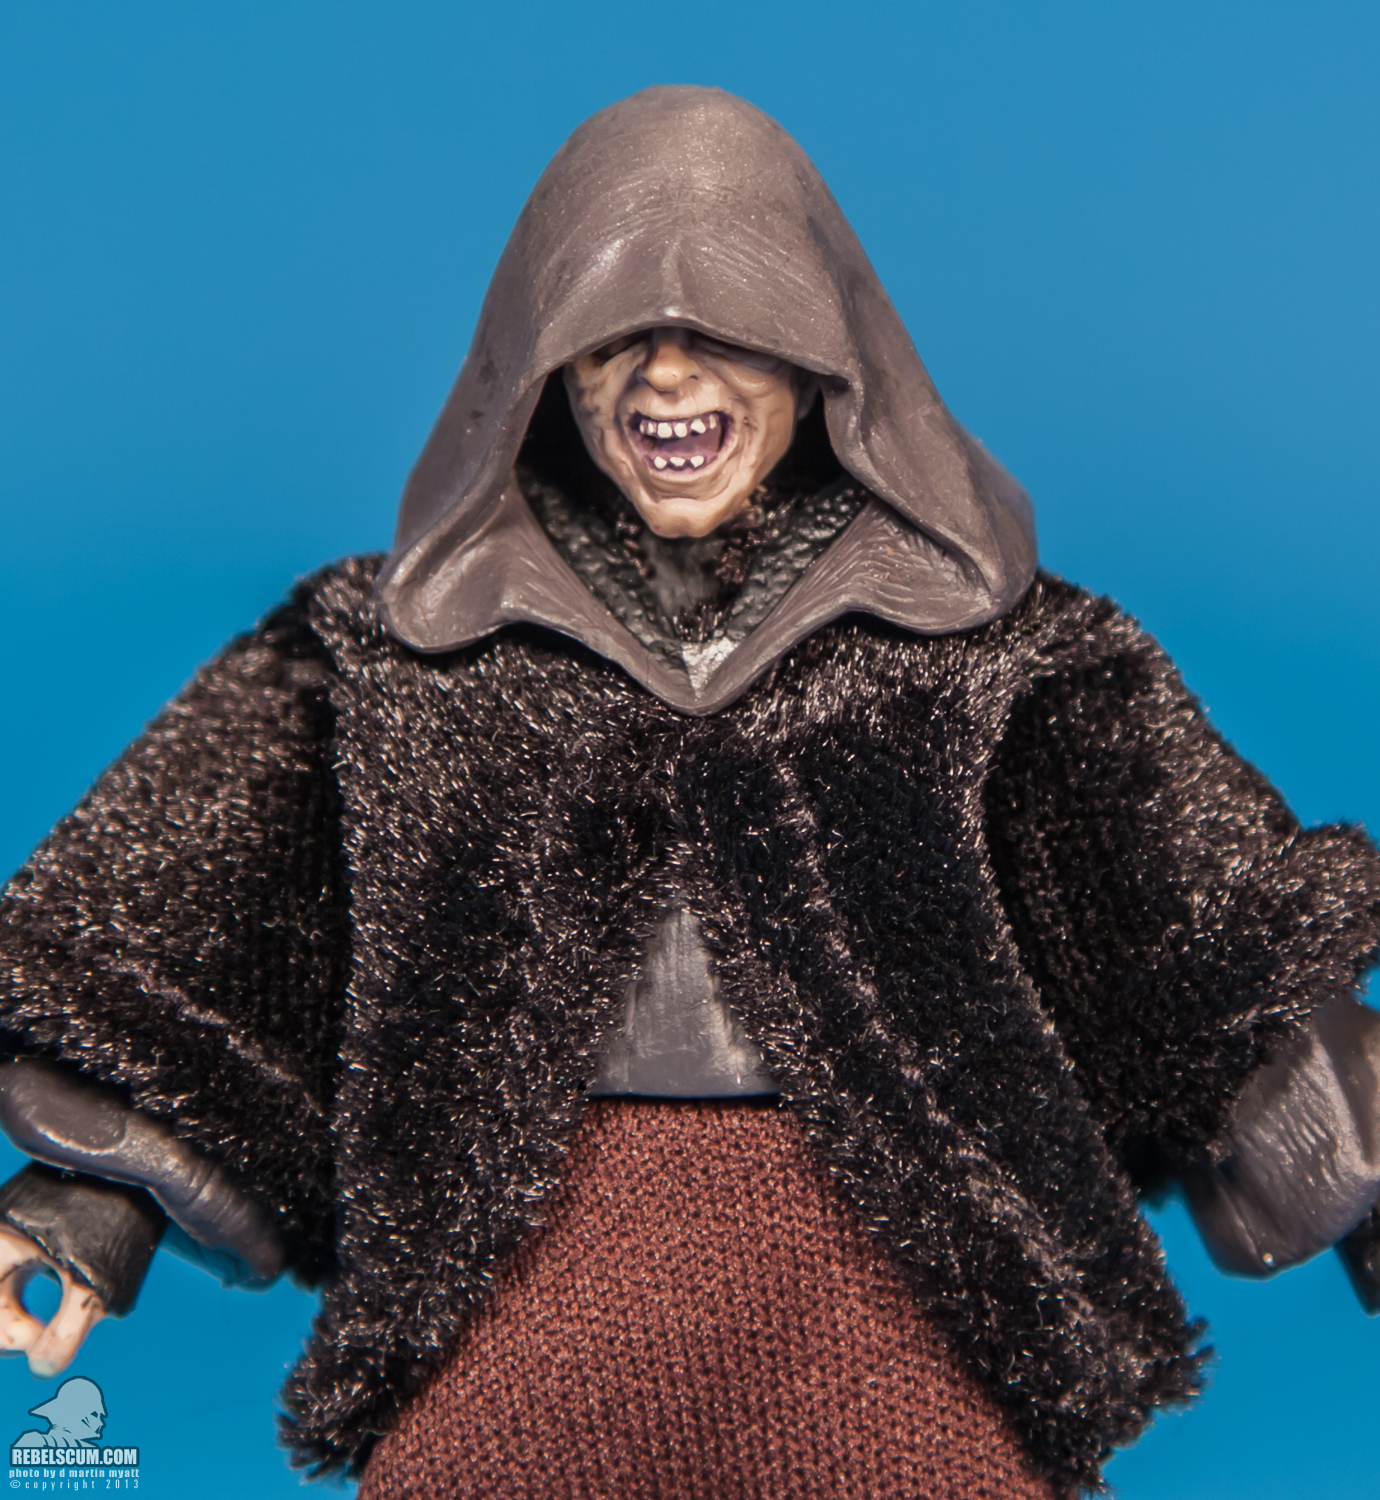 Darth_Sidious_Vintage_Collection_TVC_VC12-05.jpg